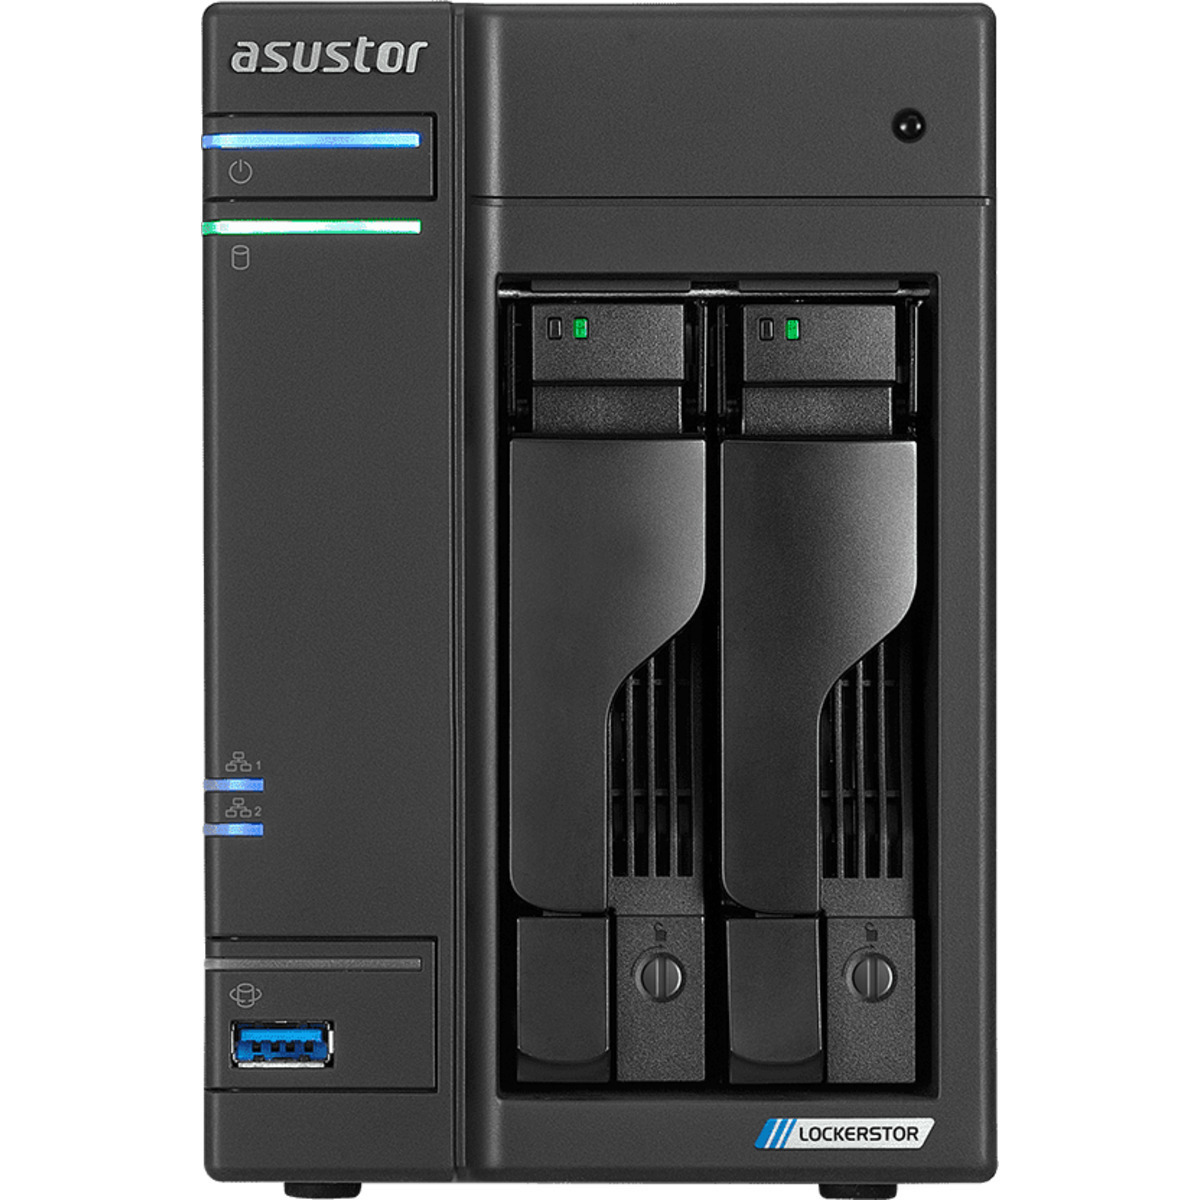 buy $1278 ASUSTOR AS6602T Lockerstor 2 24tb Desktop NAS - Network Attached Storage Device 2x12000gb Western Digital Red Plus WD120EFBX 3.5 7200rpm SATA 6Gb/s HDD NAS Class Drives Installed - Burn-In Tested - FREE RAM UPGRADE - nas headquarters buy network attached storage server device das new raid-5 free shipping usa christmas new year holiday sale AS6602T Lockerstor 2